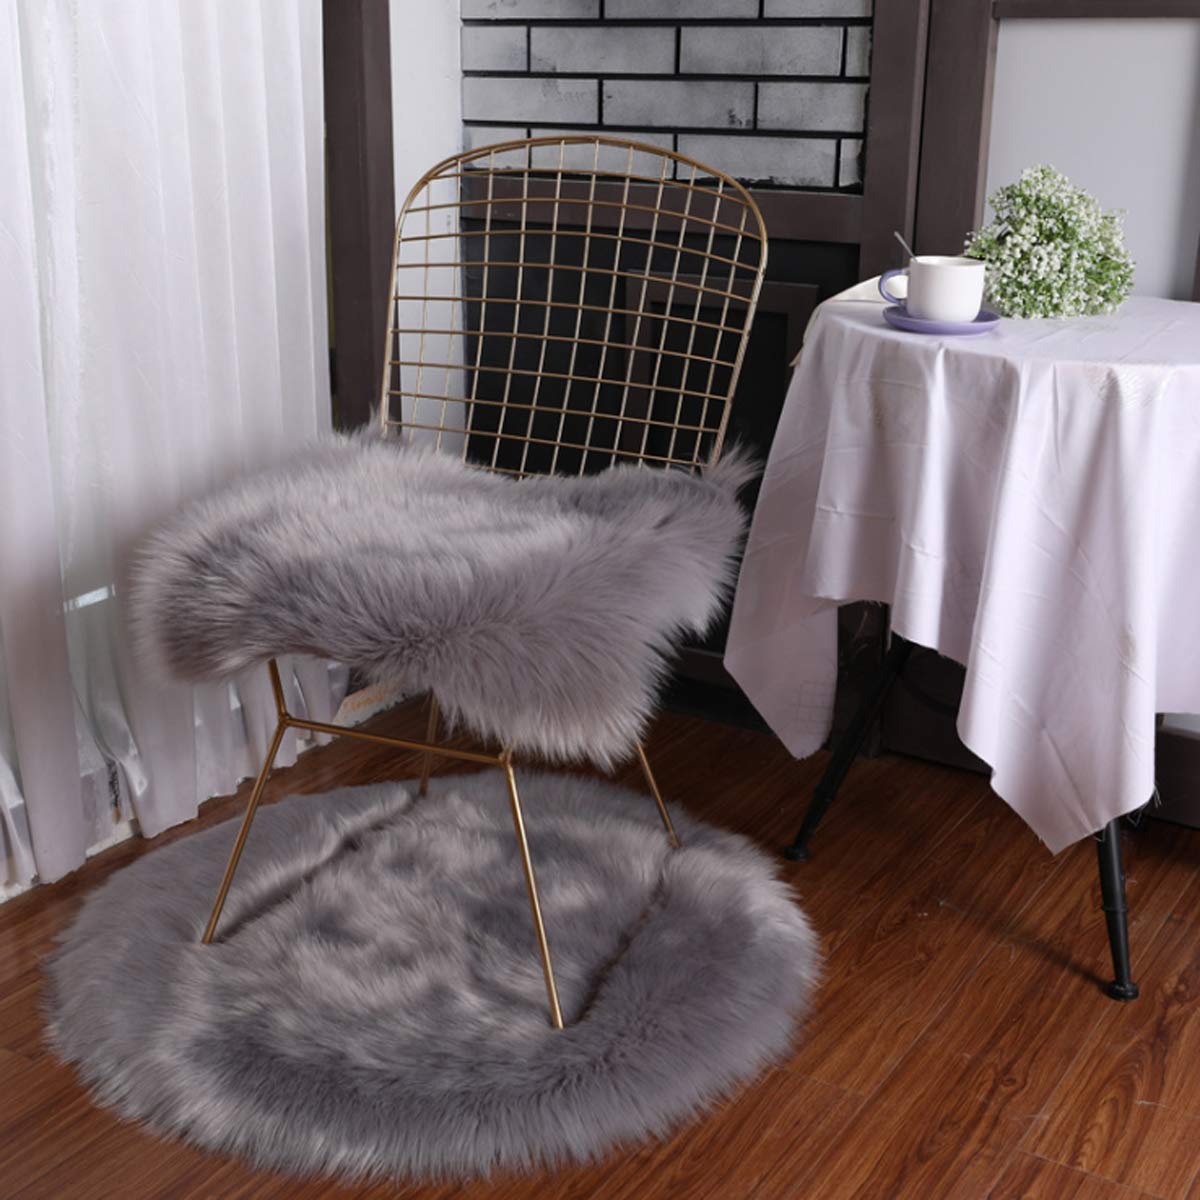 Faux Fur Chair Pad Soft Fluffy Seat Cushion Square Sheepskin Chair Cover Chair Seat Pad for Desk Office Chair (16"x16",Grey)